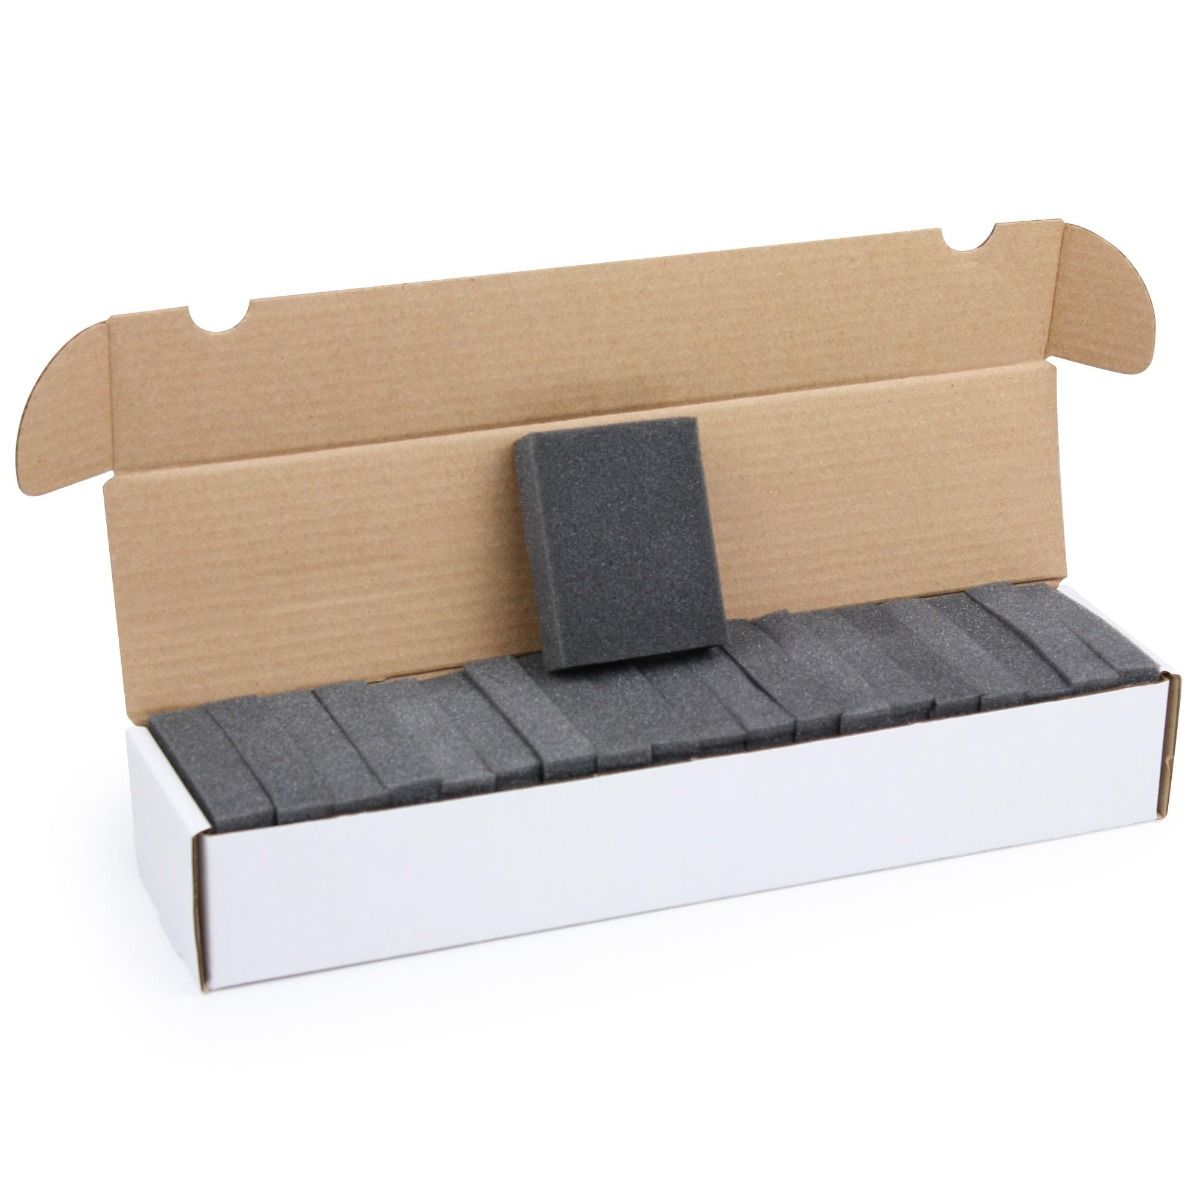 Monster Pads for Storage Boxes | Event Horizon Hobbies CA